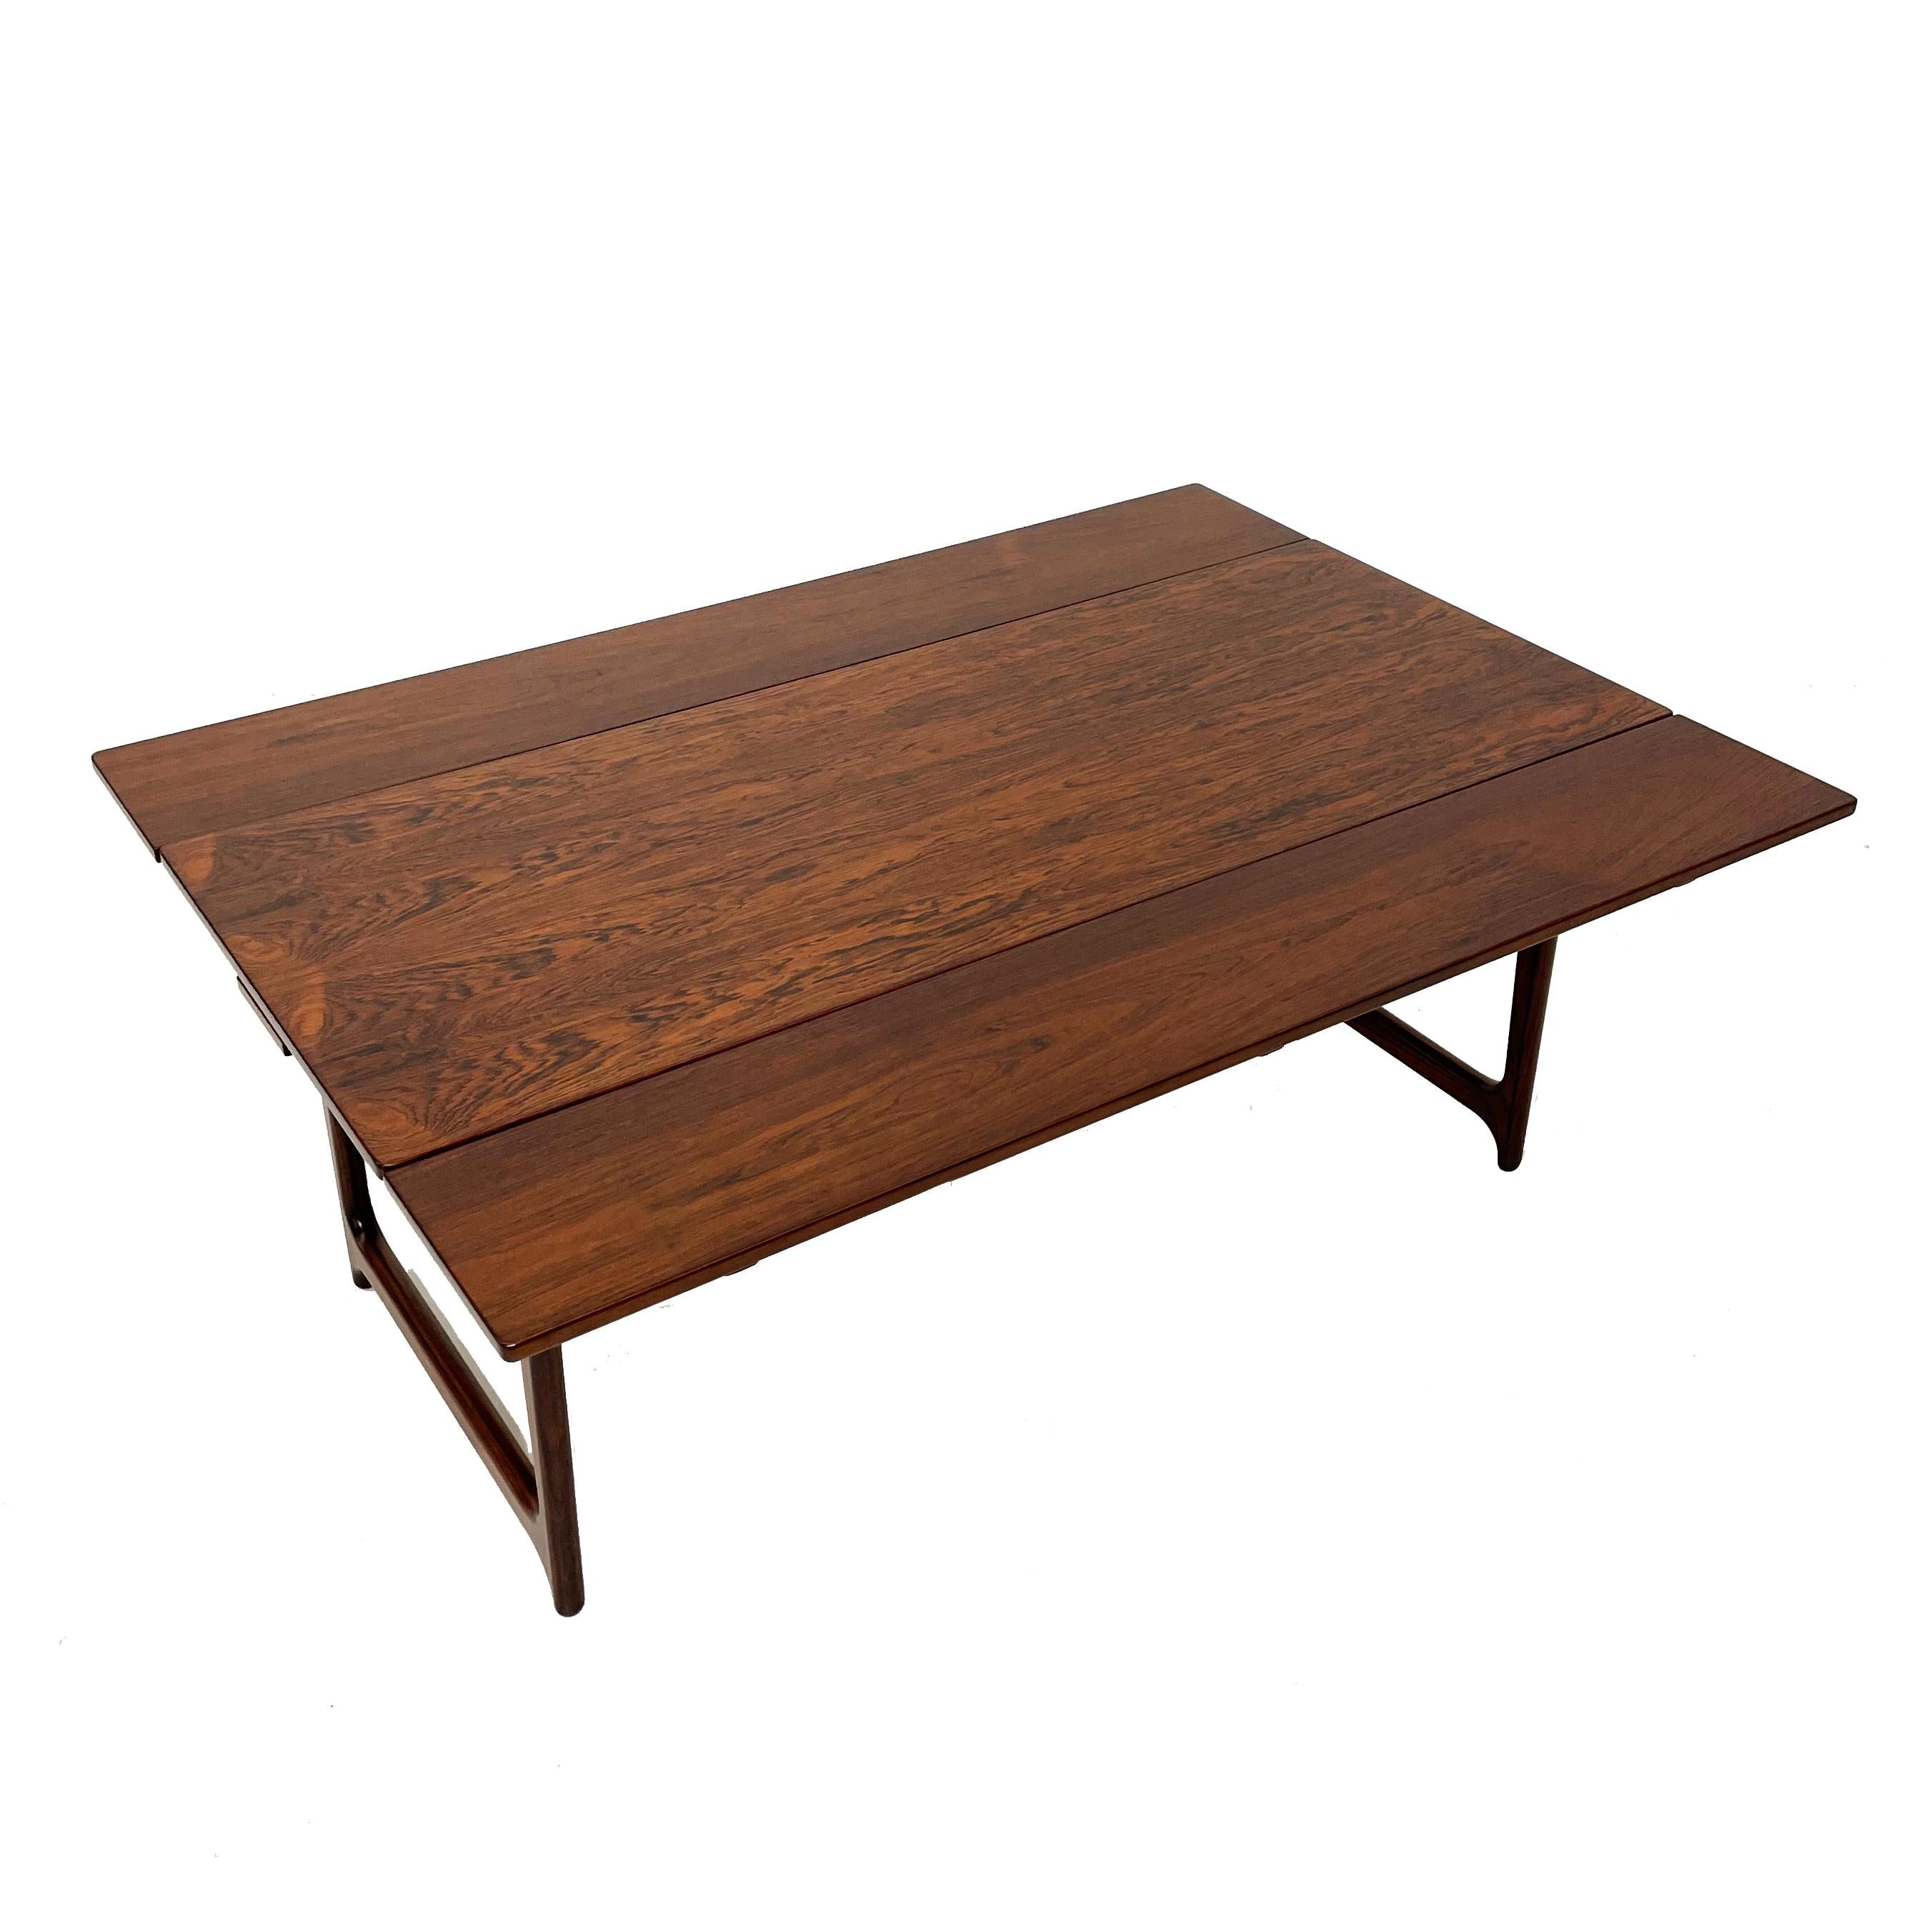 Danish rosewood coffee table 1960s. Extendable In Excellent Condition For Sale In Braga, Braga